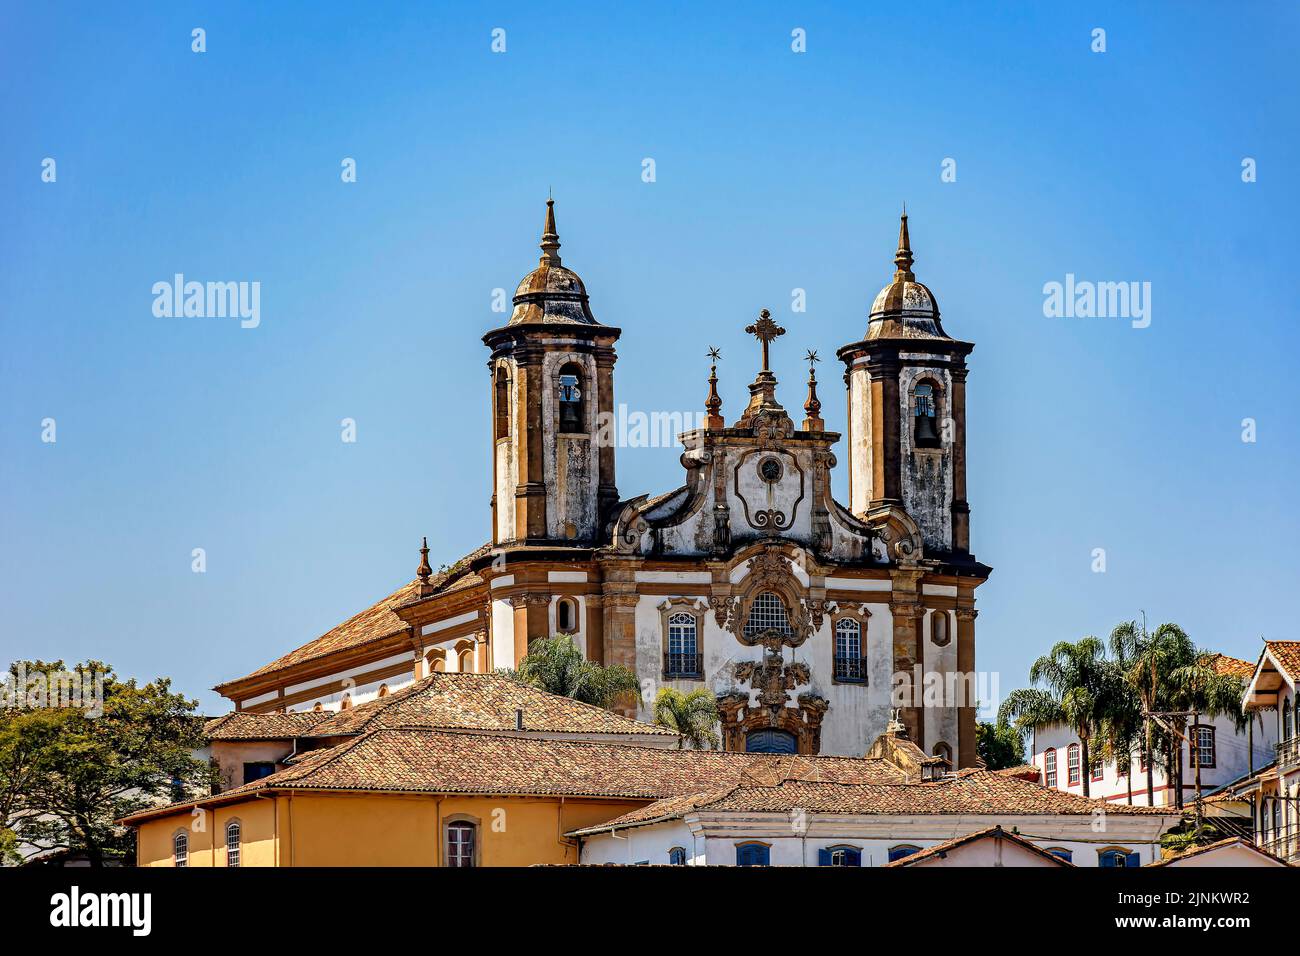 Baroque style historic church tower emerging from behind old houses in Ouro Preto city in Minas Gerais state, Brazil Stock Photo